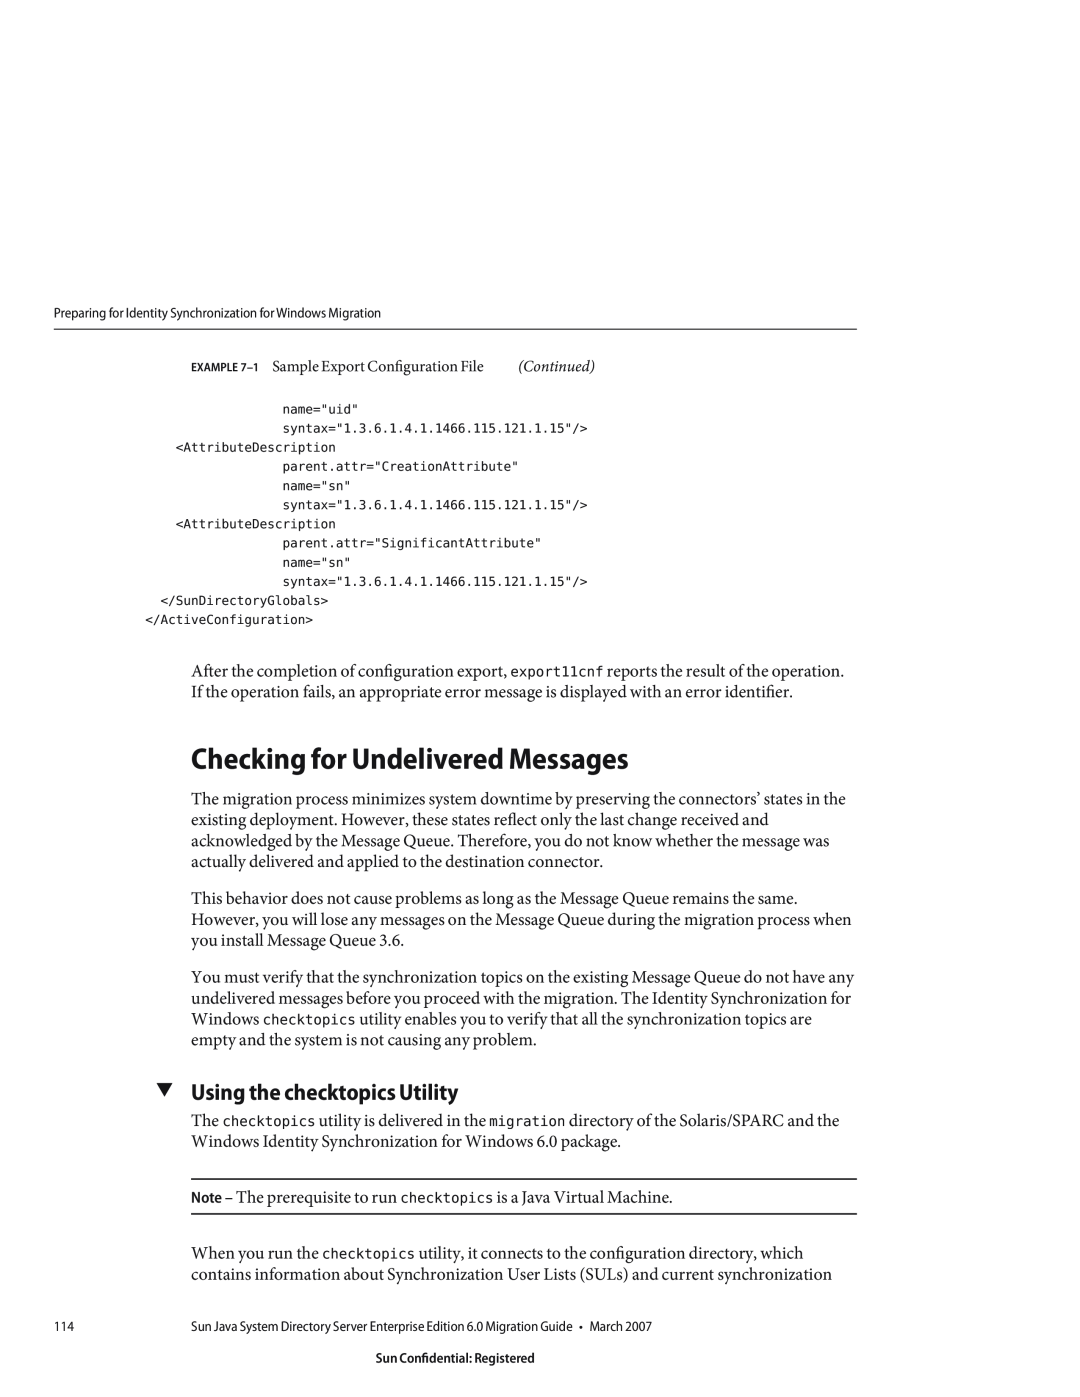 Sun Microsystems 8190994 manual Checking for Undelivered Messages, Using the checktopics Utility 